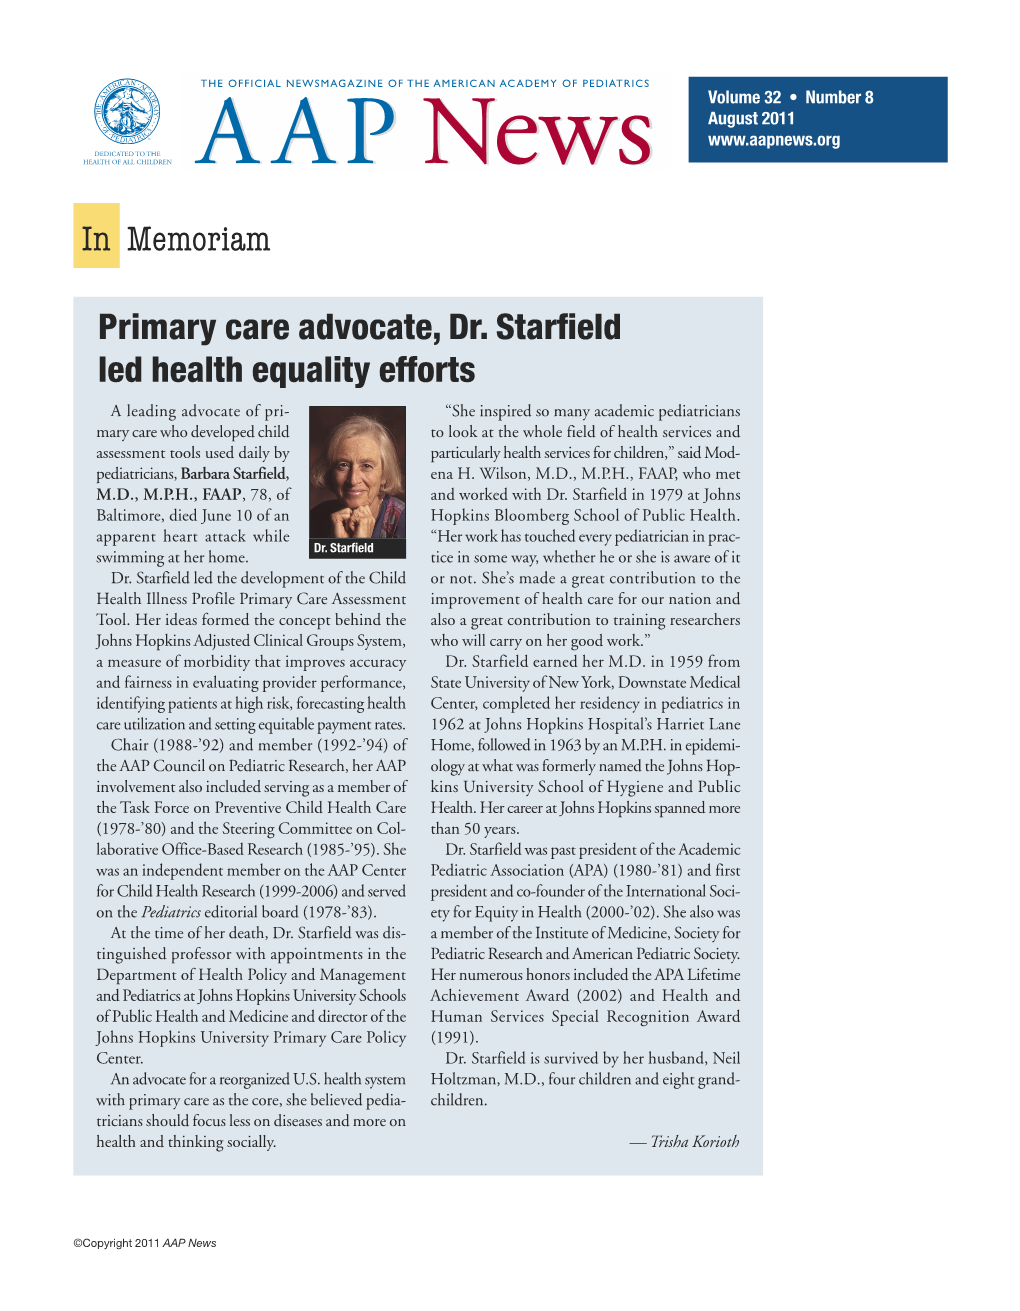 In Memoriam Primary Care Advocate, Dr. Starfield Led Health Equality Efforts